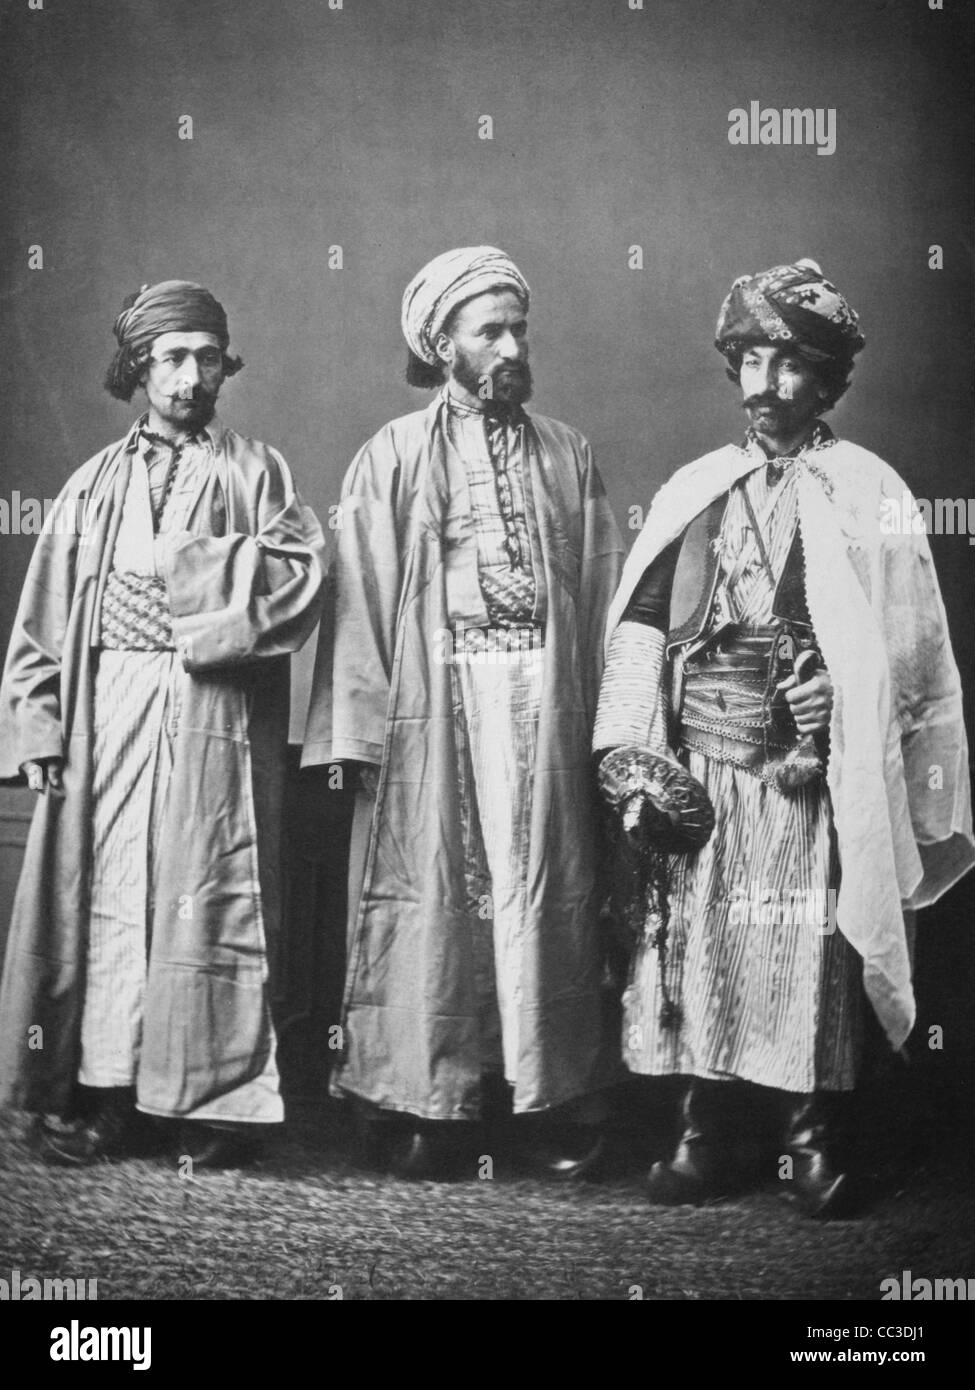 Studio portrait of models wearing traditional clothing from the province of Diarbèkir (Diyarbakır), Ottoman Empire Circa 1873 Stock Photo